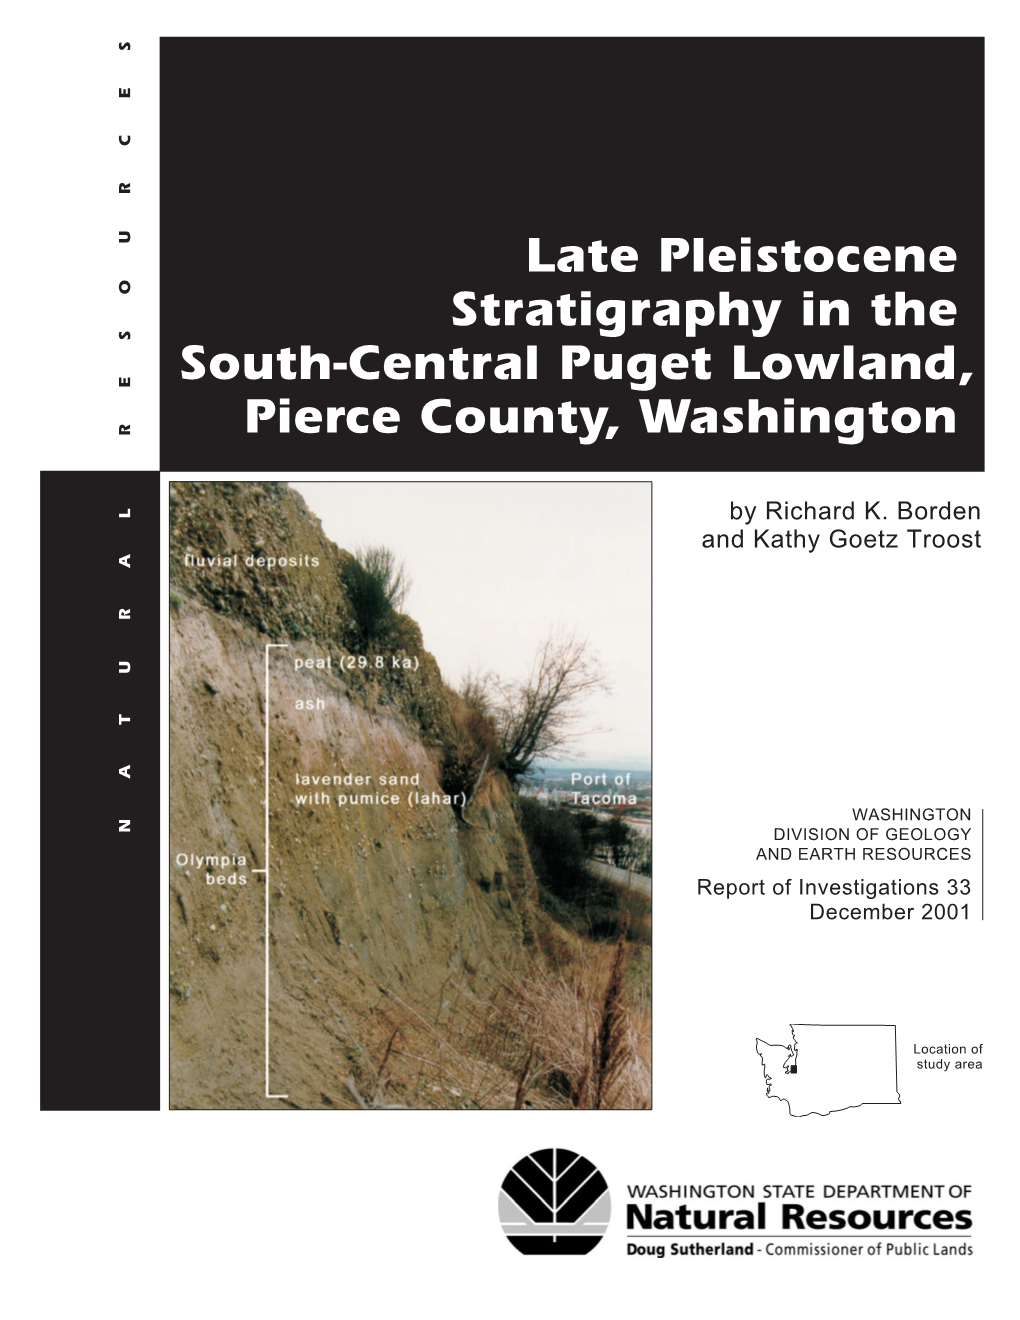 Late Pleistocene Stratigraphy in the South-Central Puget Lowland, Pierce County, Washington RESOURCES